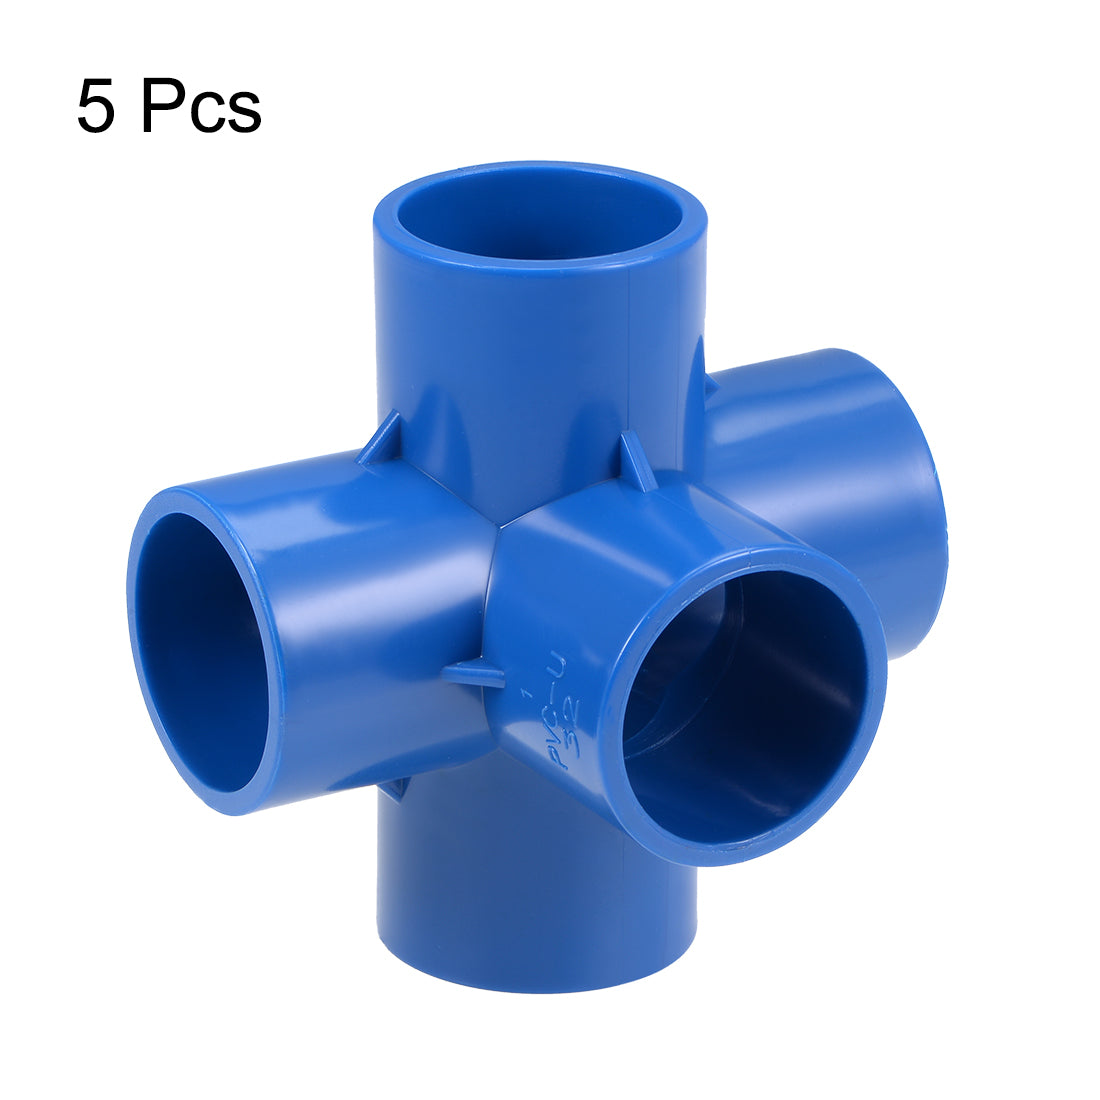 uxcell Uxcell 5 Way 32mm Tee Metric PVC Fitting Elbow - PVC Furniture Elbow Fittings Blue 5Pcs